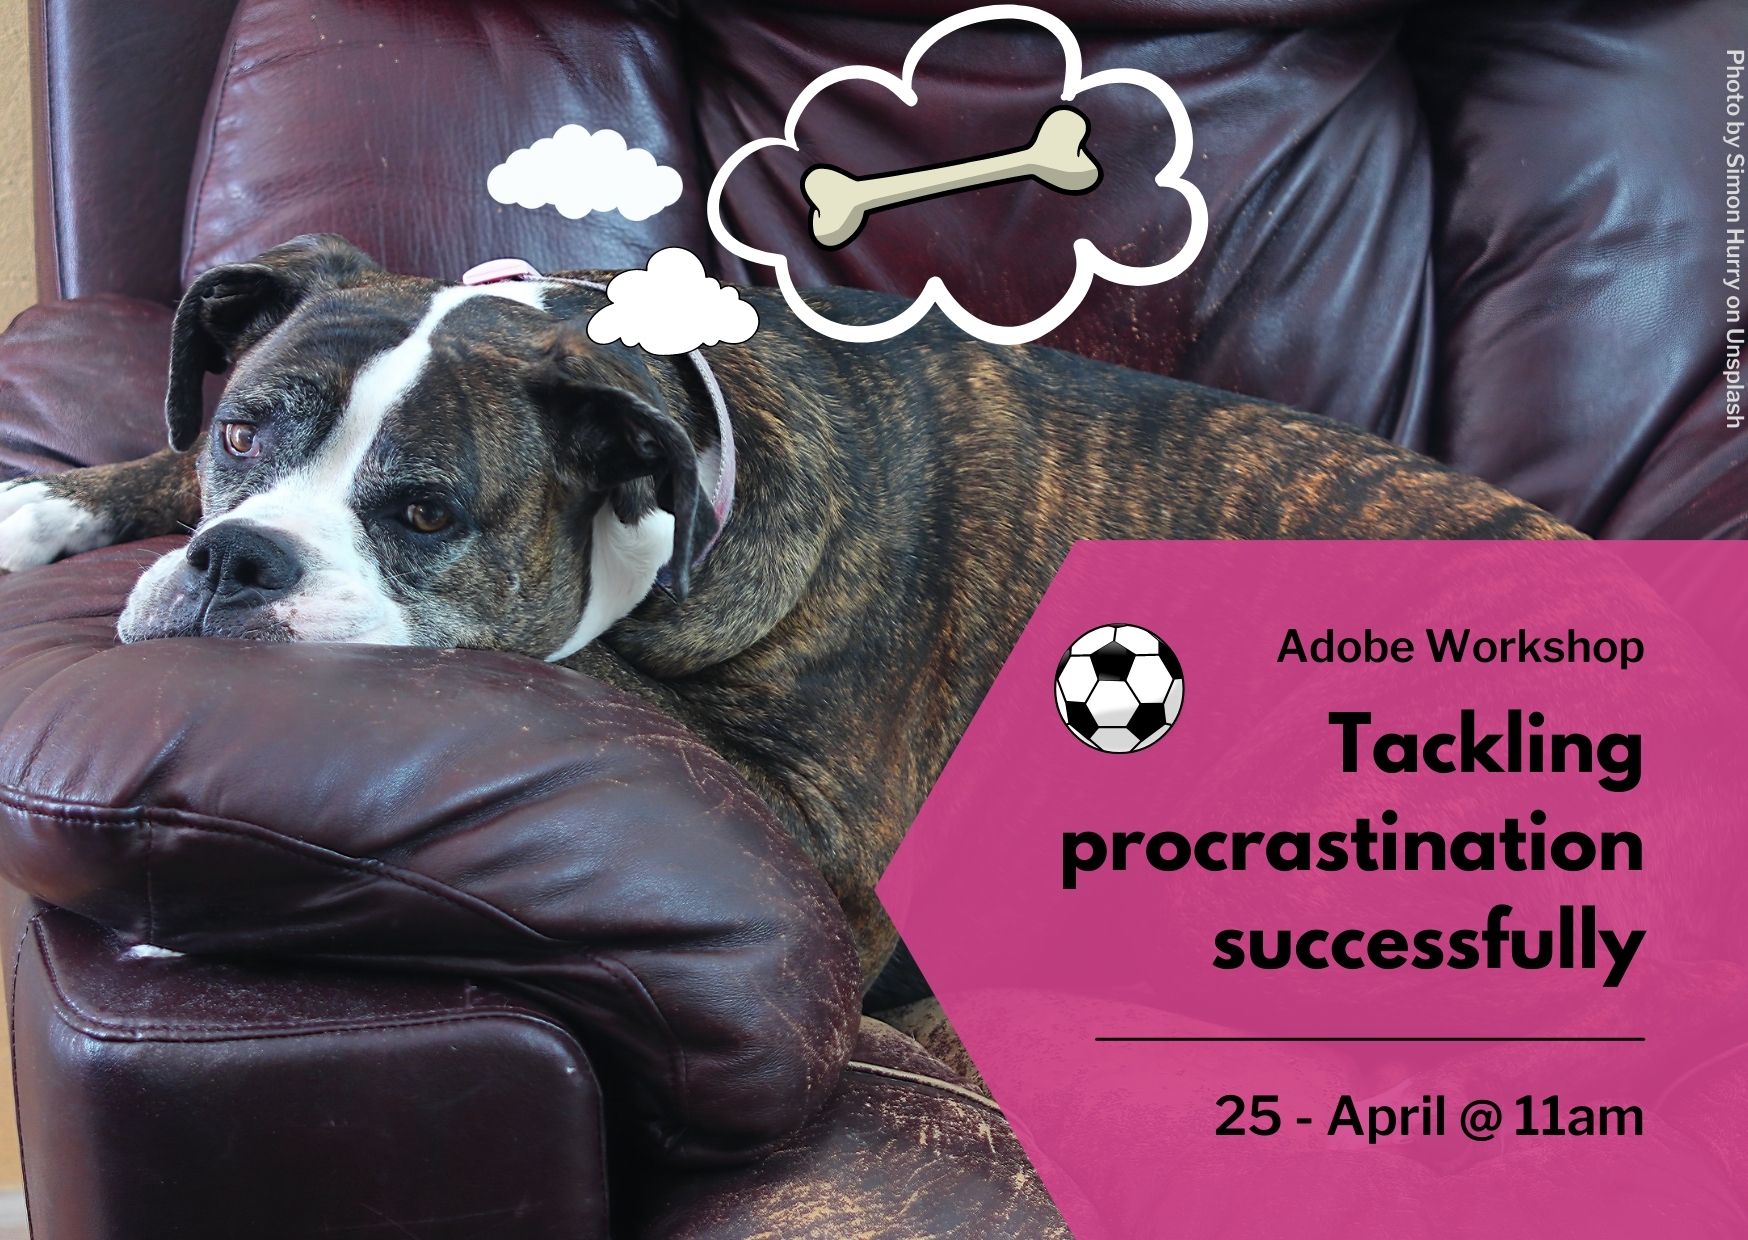 Decorative pic of a boxer dog dreaming of bones, and the session title 'Tackling procrastination successfully', and the date of 25 April 11am 